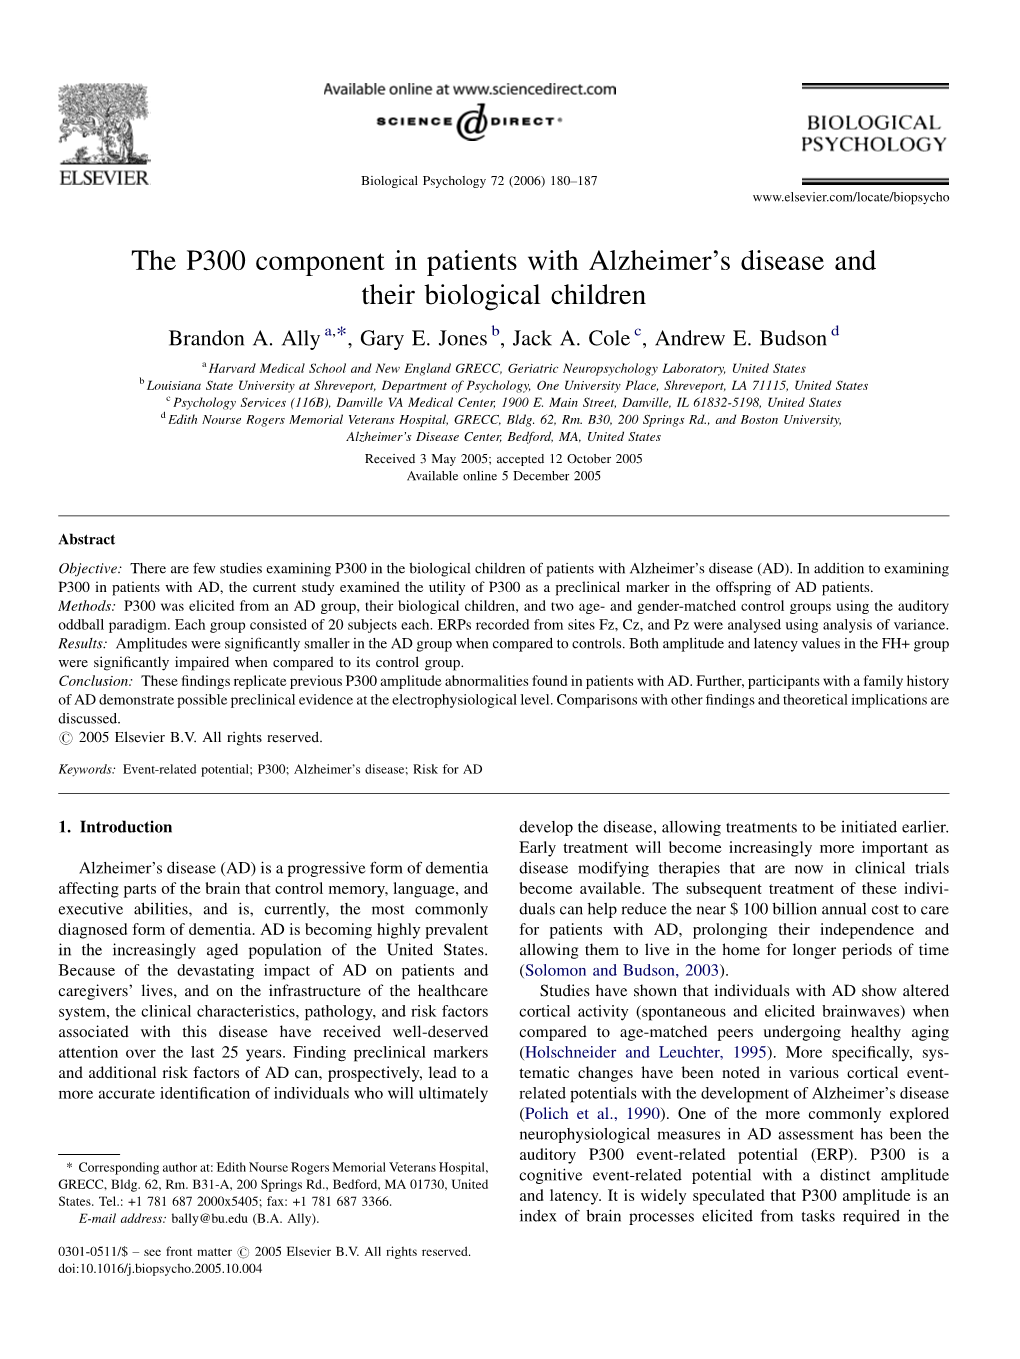 The P300 Component in Patients with Alzheimer's Disease and Their